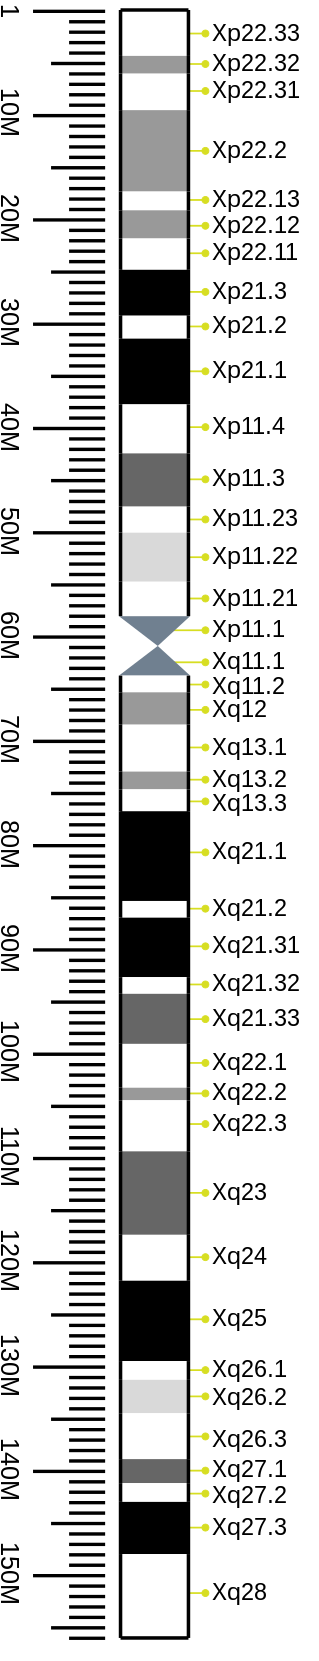 G-banding ideogram of human X chromosome in resolution 850 bphs. Band length in this diagram is proportional to base-pair length. This type of ideogram is generally used in genome browsers (e.g. Ensembl, UCSC Genome Browser).